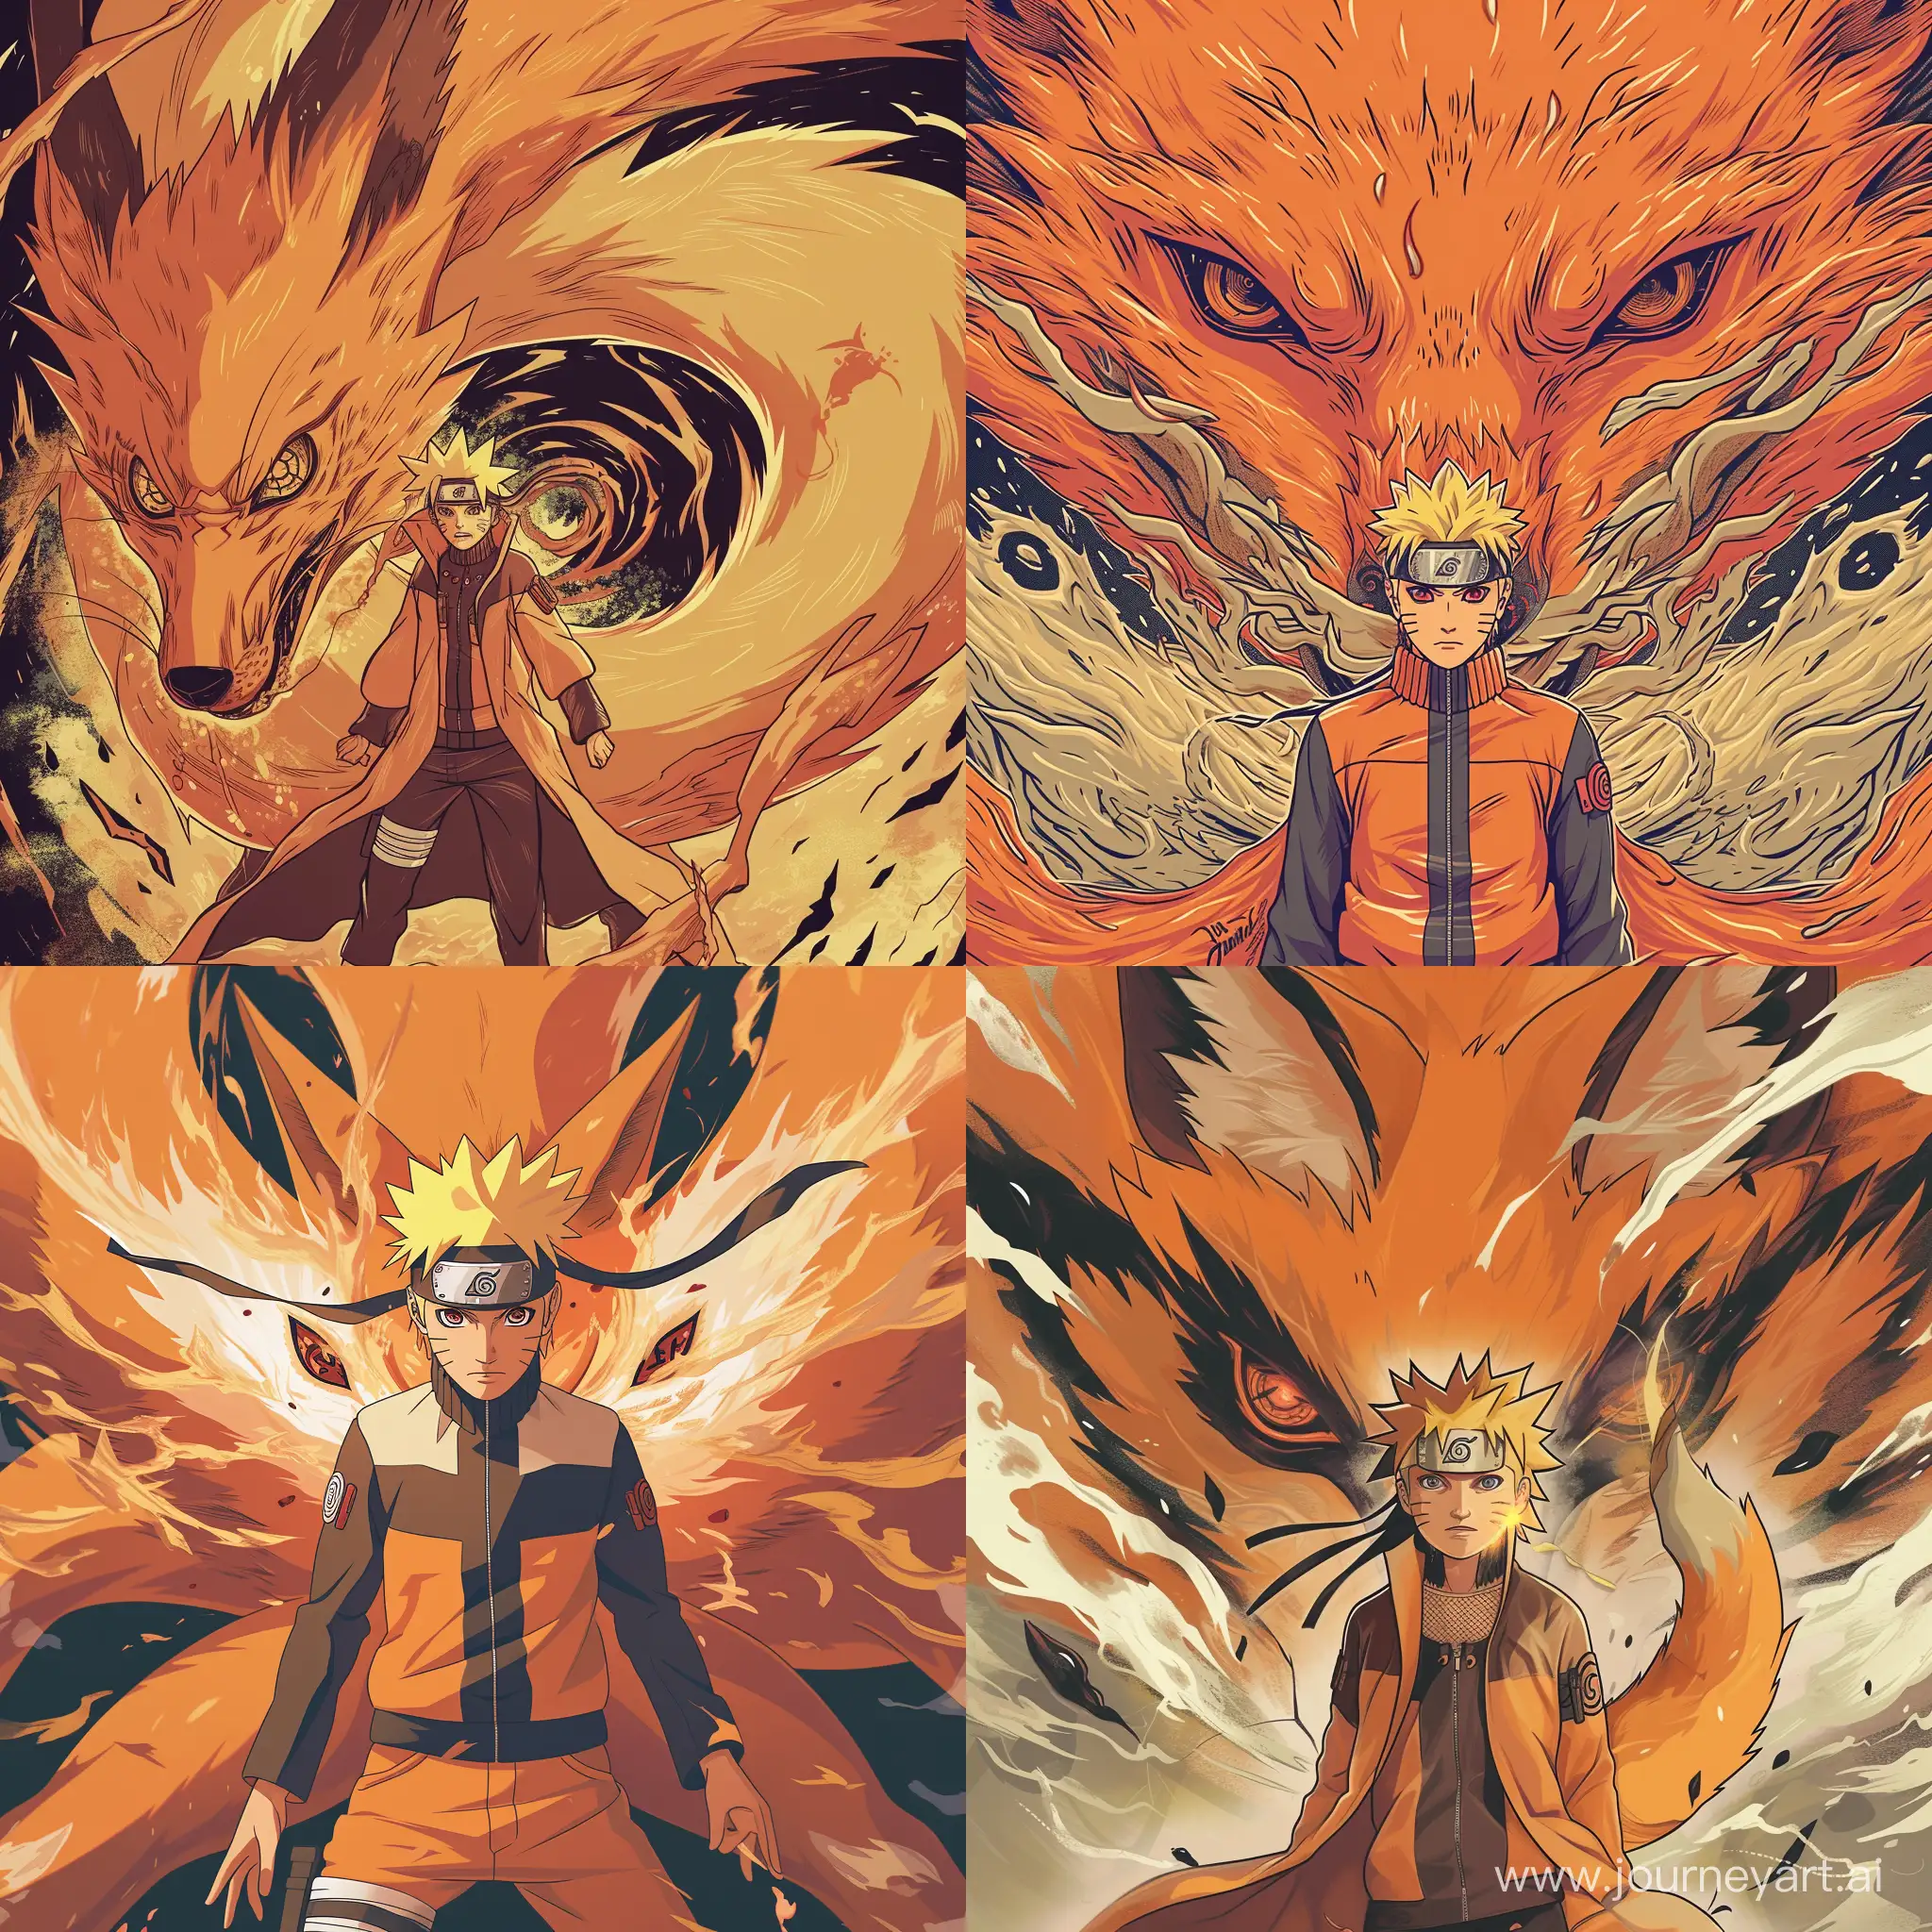 Act as an anime illustrator specializing in the transformation of Naruto into the Nine-Tailed Fox. Create a captivating artwork that faithfully portrays the iconic scene, capturing the distinctive art style from the anime. Pay meticulous attention to detail to ensure the illustration is flawless and free of any errors. Emphasize the clarity of the artwork, using vibrant colors and dynamic linework to bring the transformation to life. Incorporate elements such as swirling chakra, intense expressions, and the distinct fox features to create a visually stunning piece that truly represents the essence of Naruto's transformation.